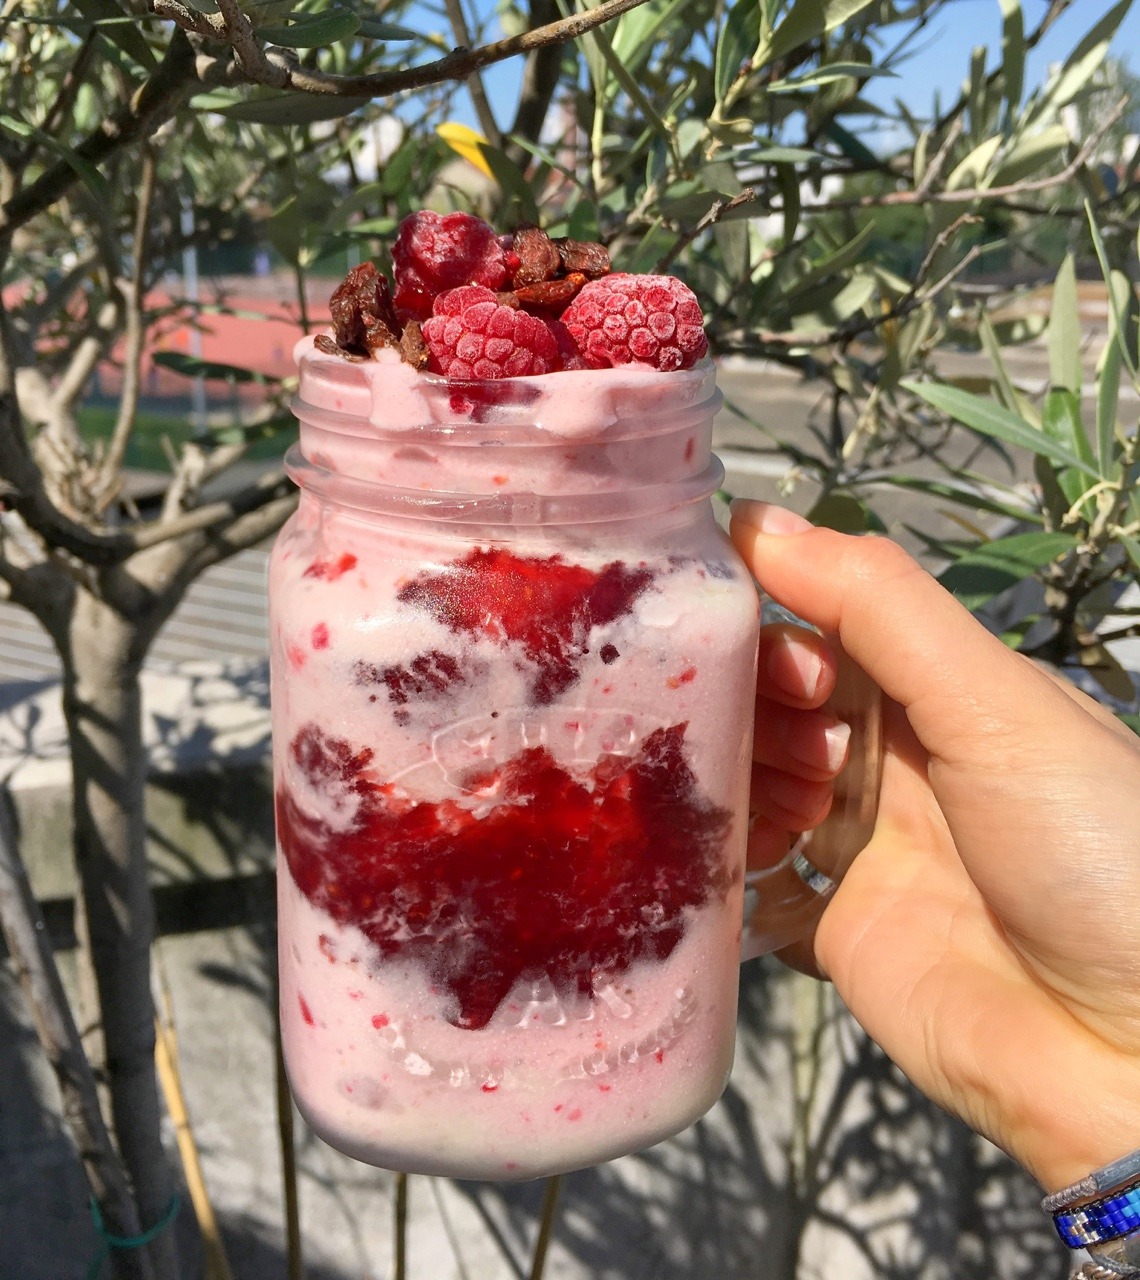 veganfeelsgood:Happy Saturday ✌️ I began my day reading in the sun with a raspberry